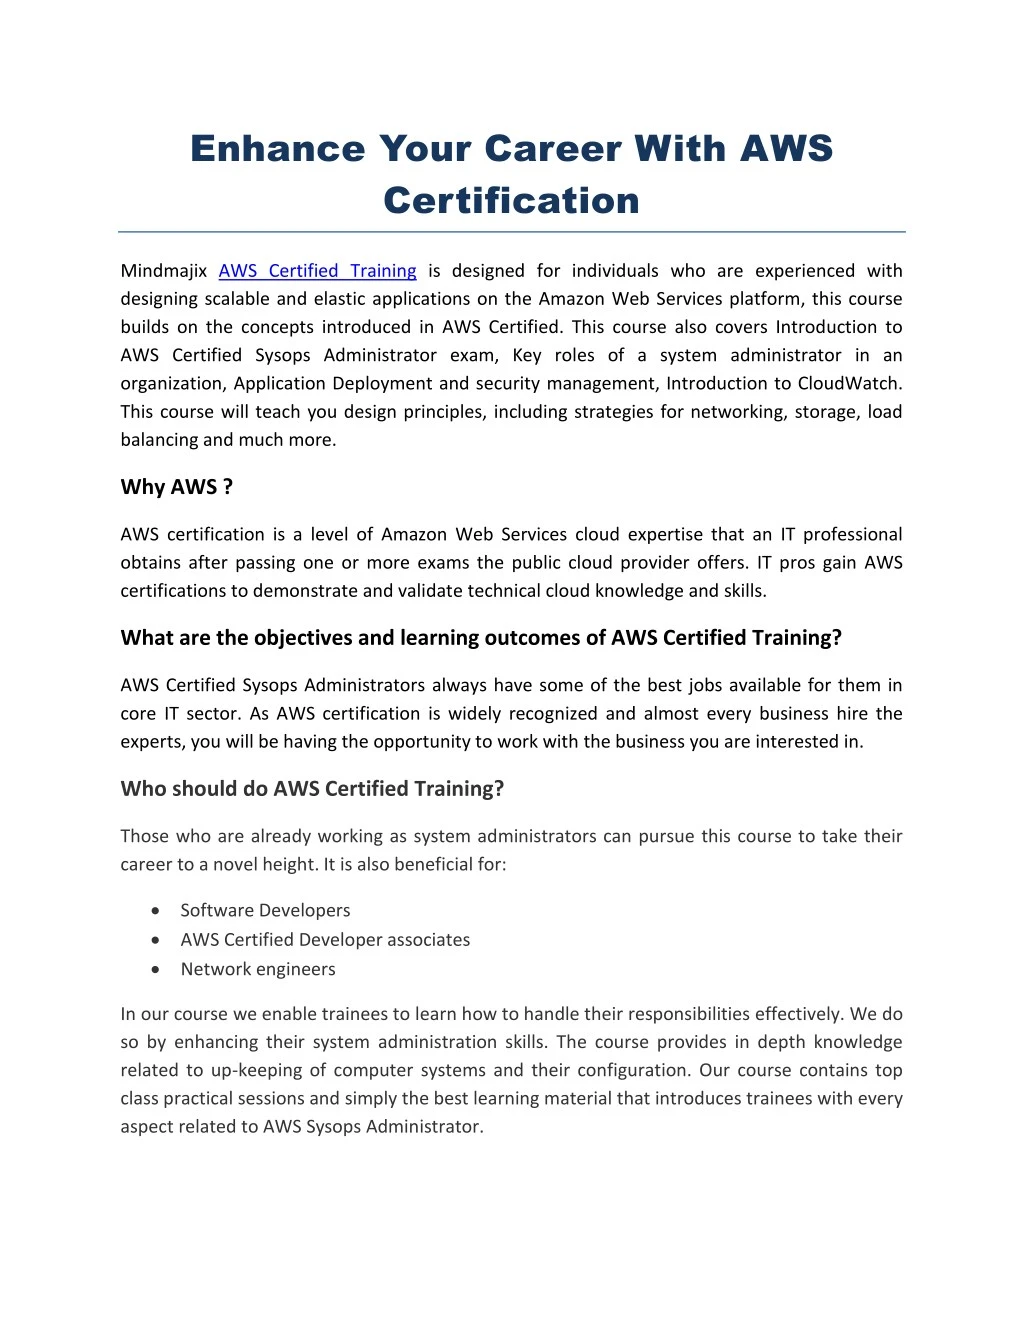 enhance your career with aws certification